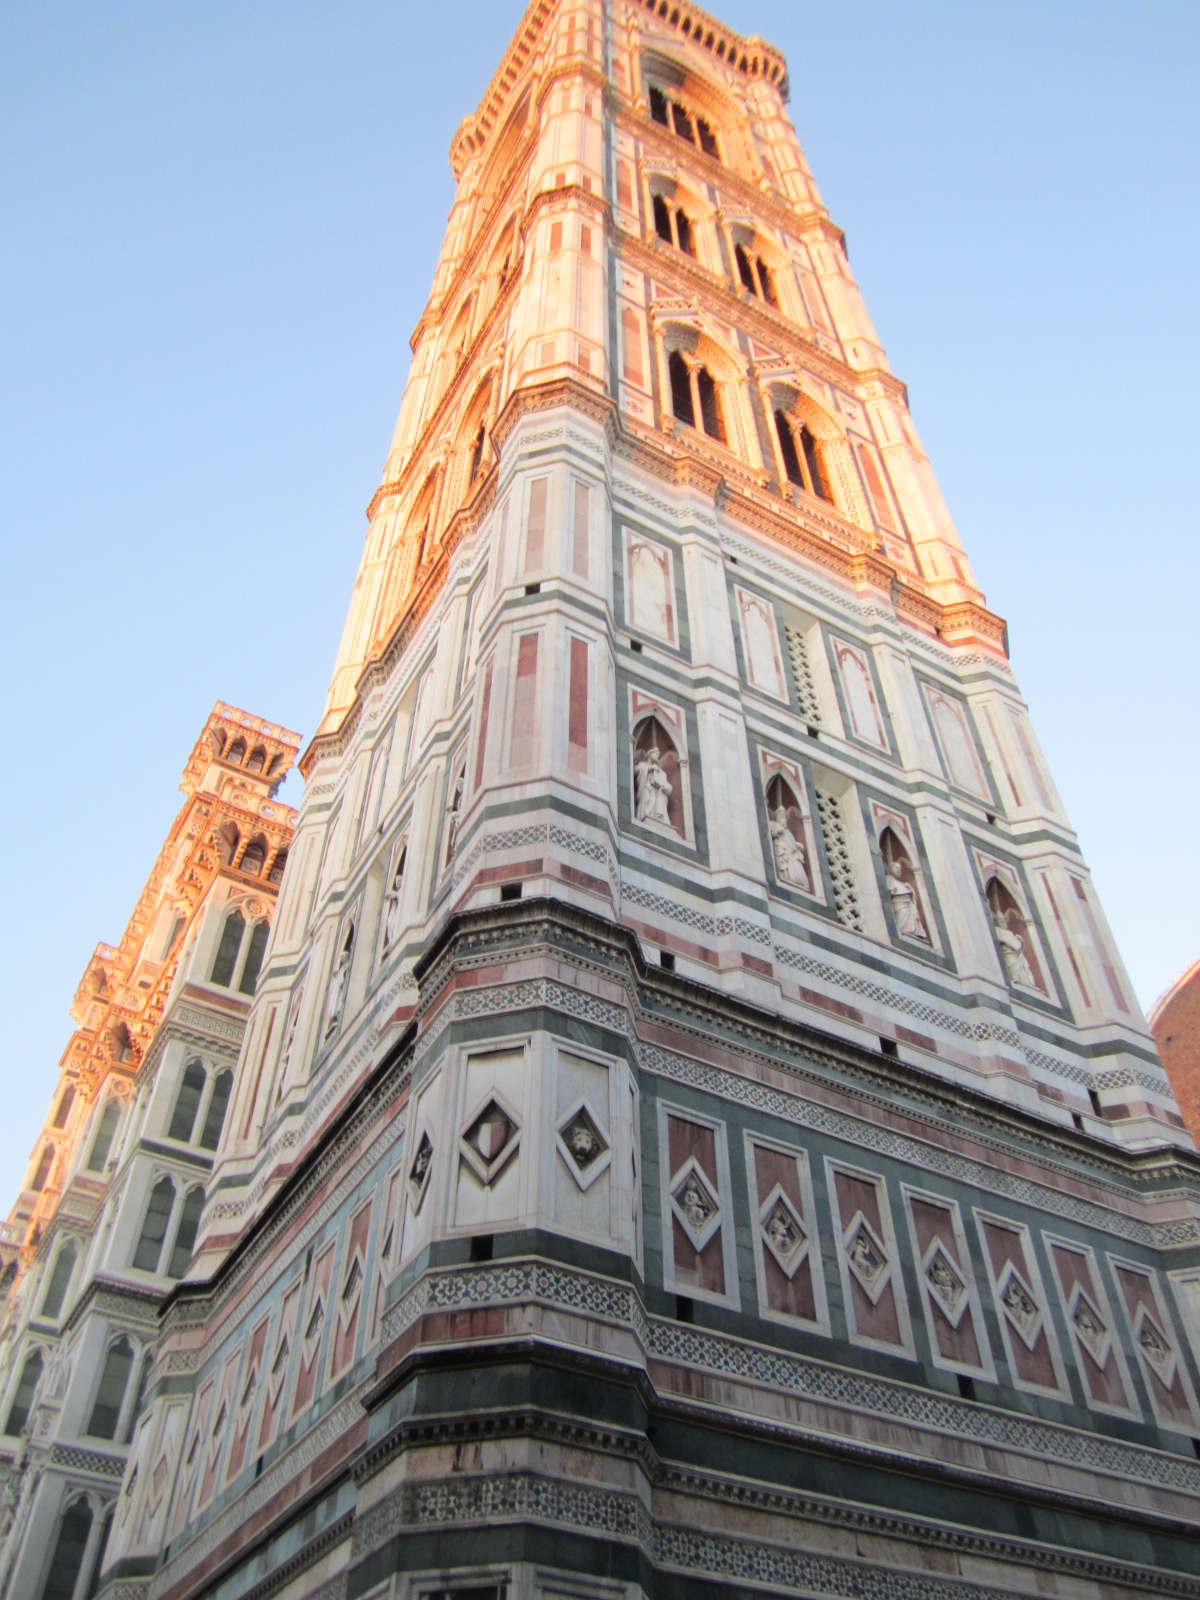 Belfry of Giotto